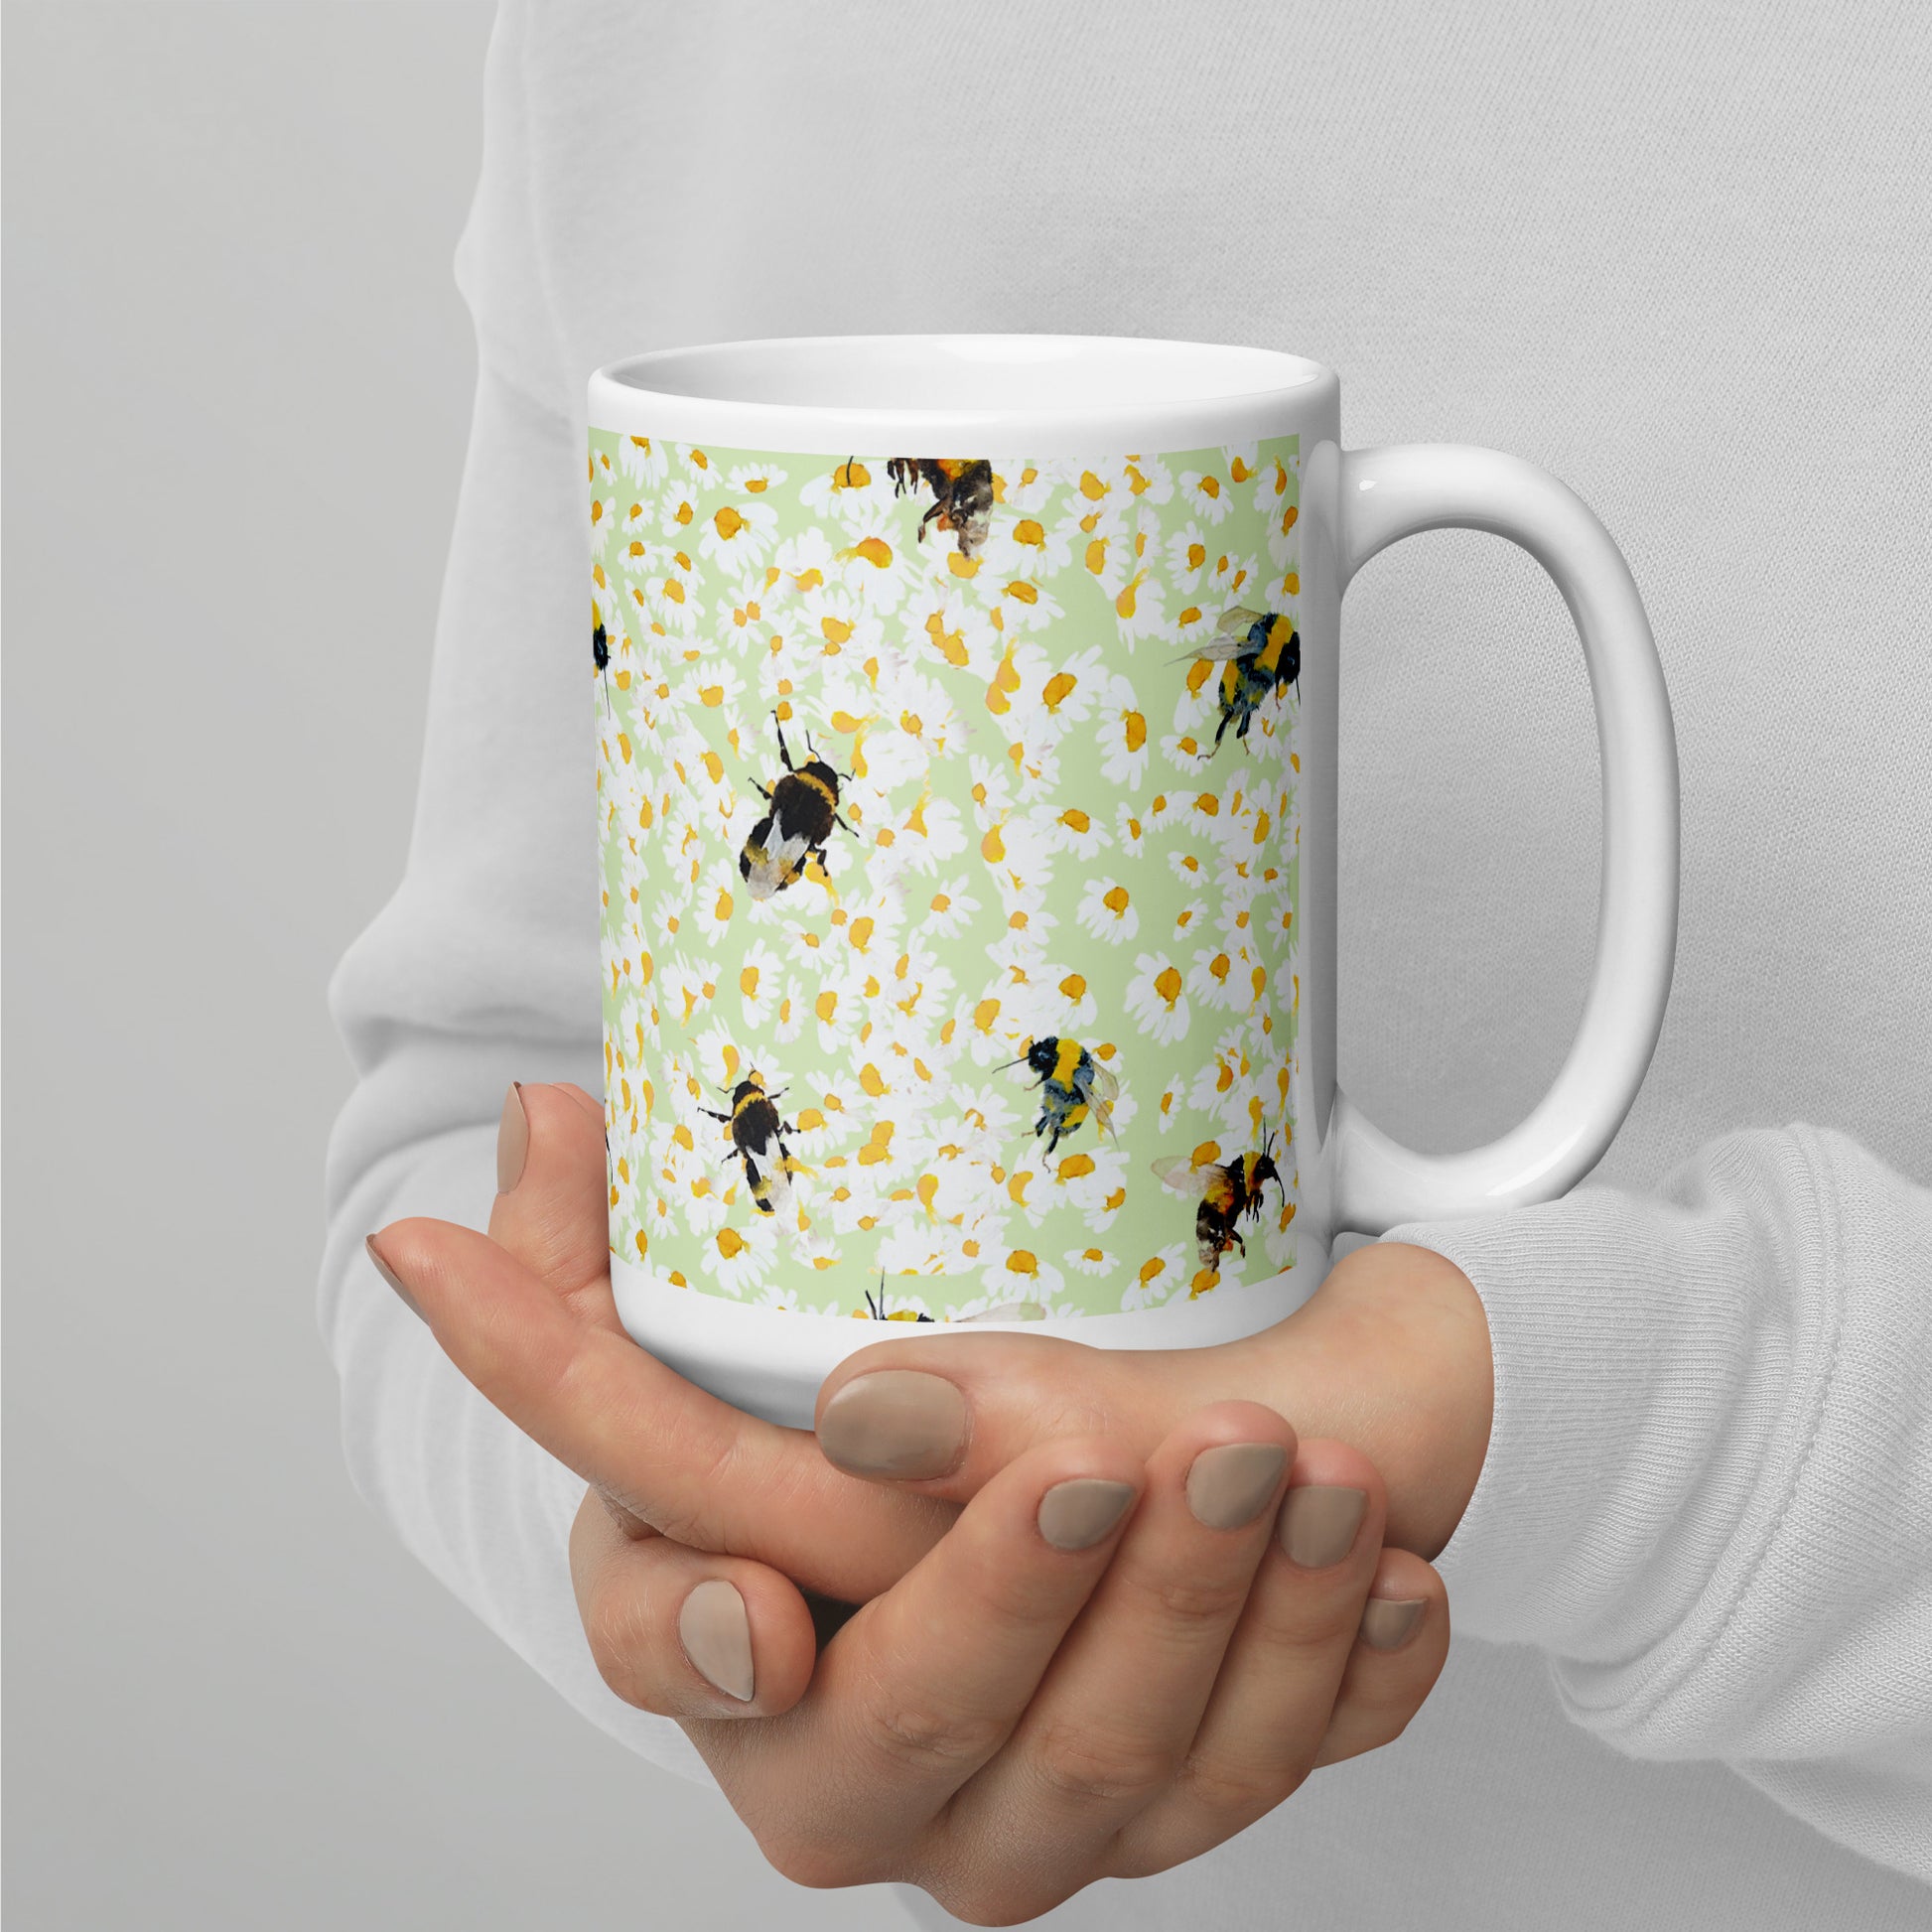 Design Bee and Daisies Mug by Artist Annie Grant